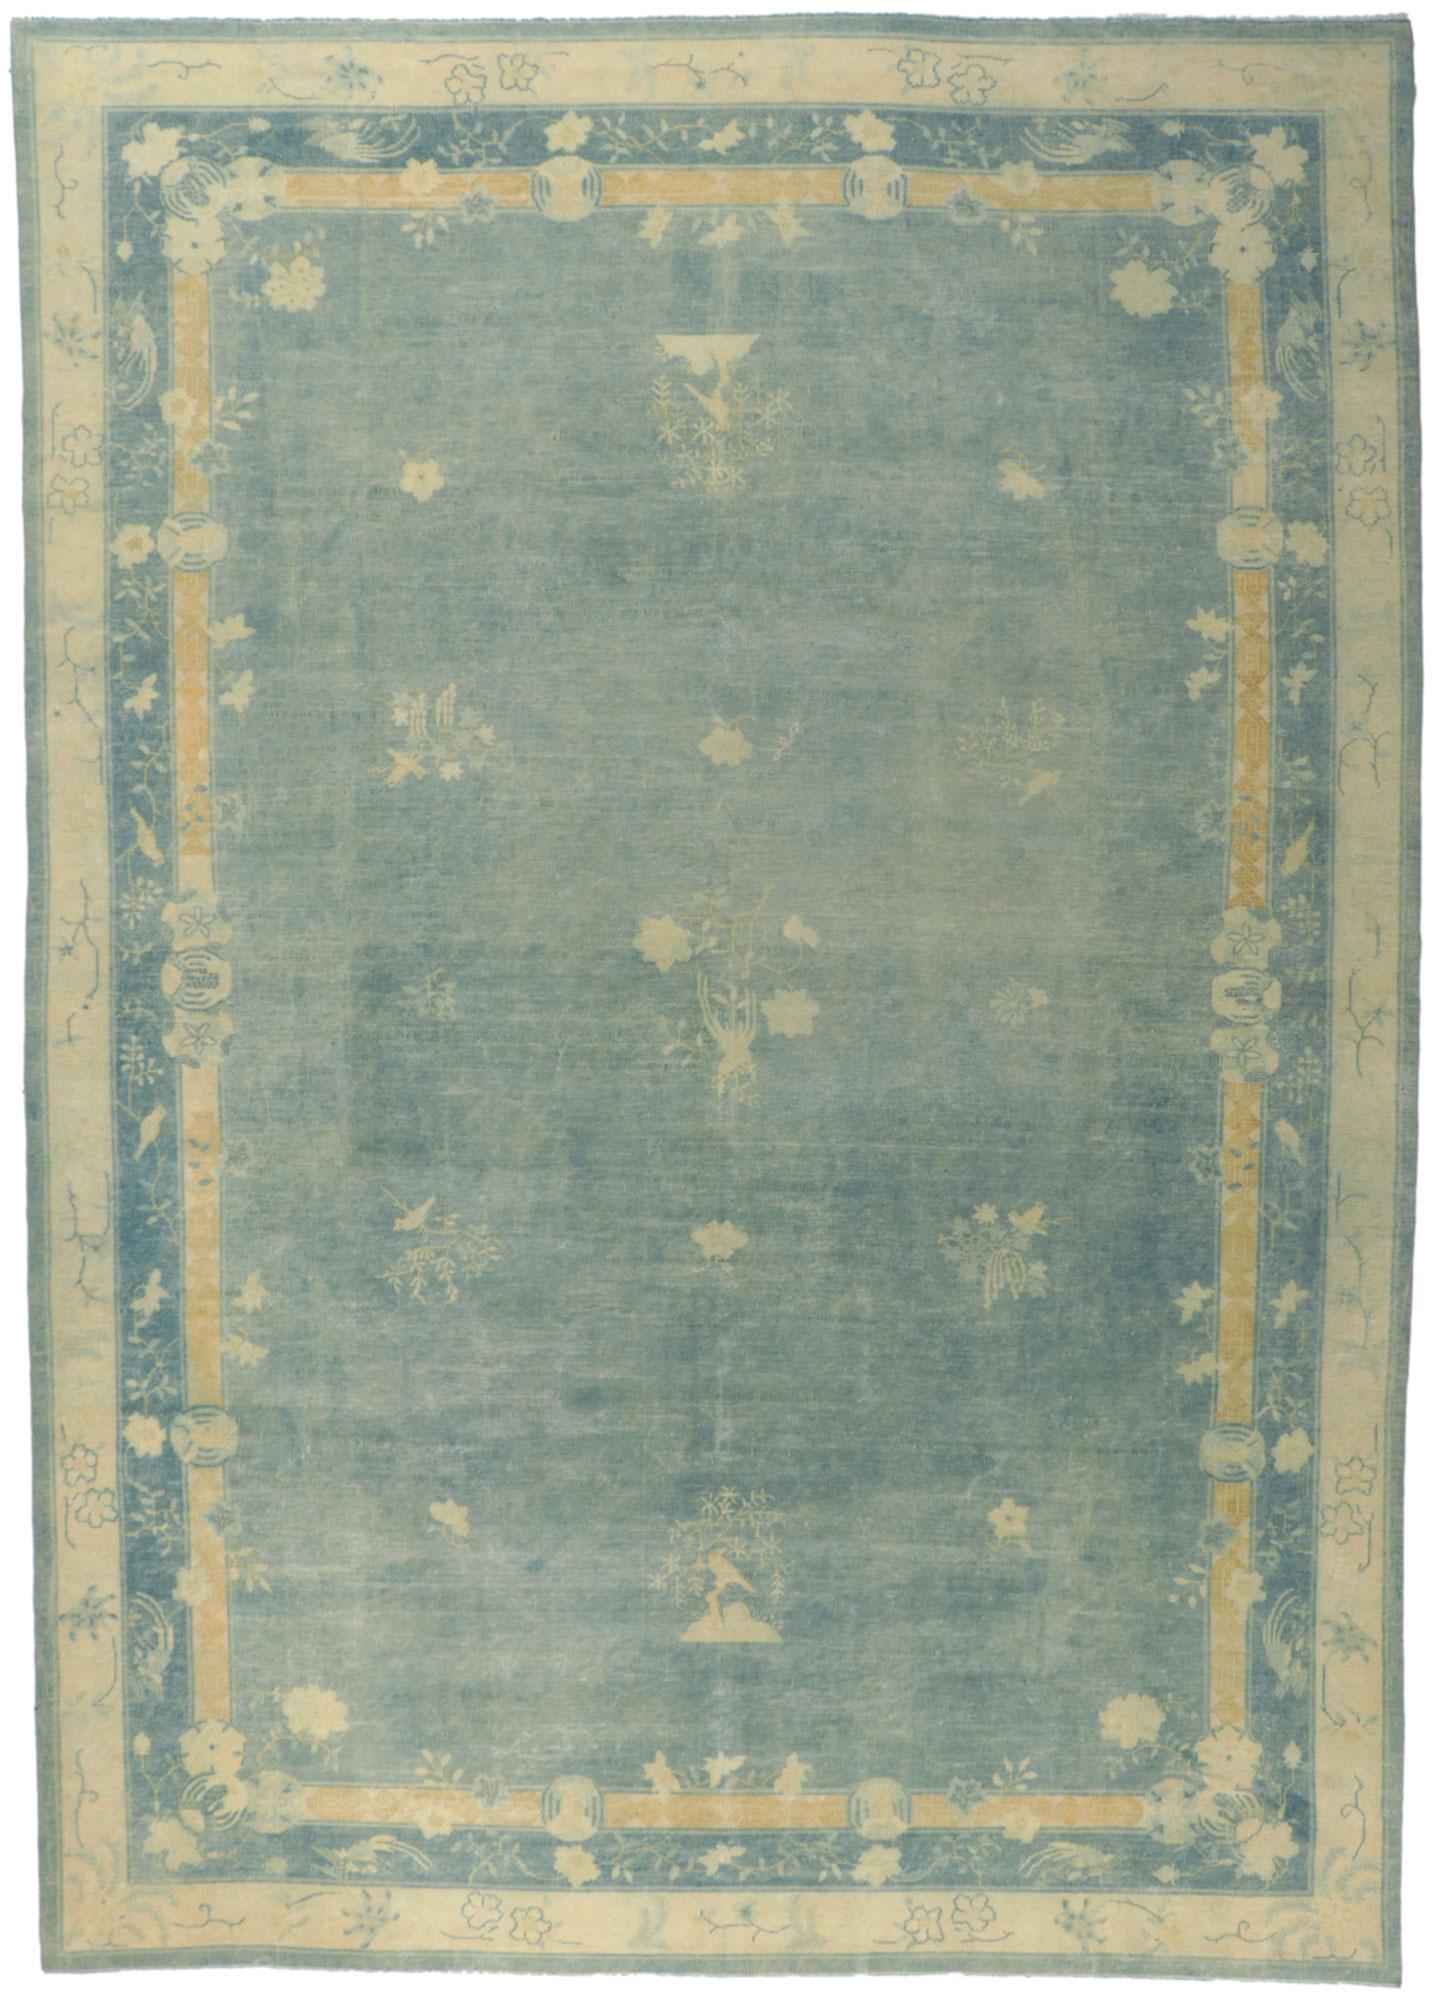 1880s Antique Chinese Peking Rug, Chinoiserie Chic Meets Quiet Sophistication For Sale 3